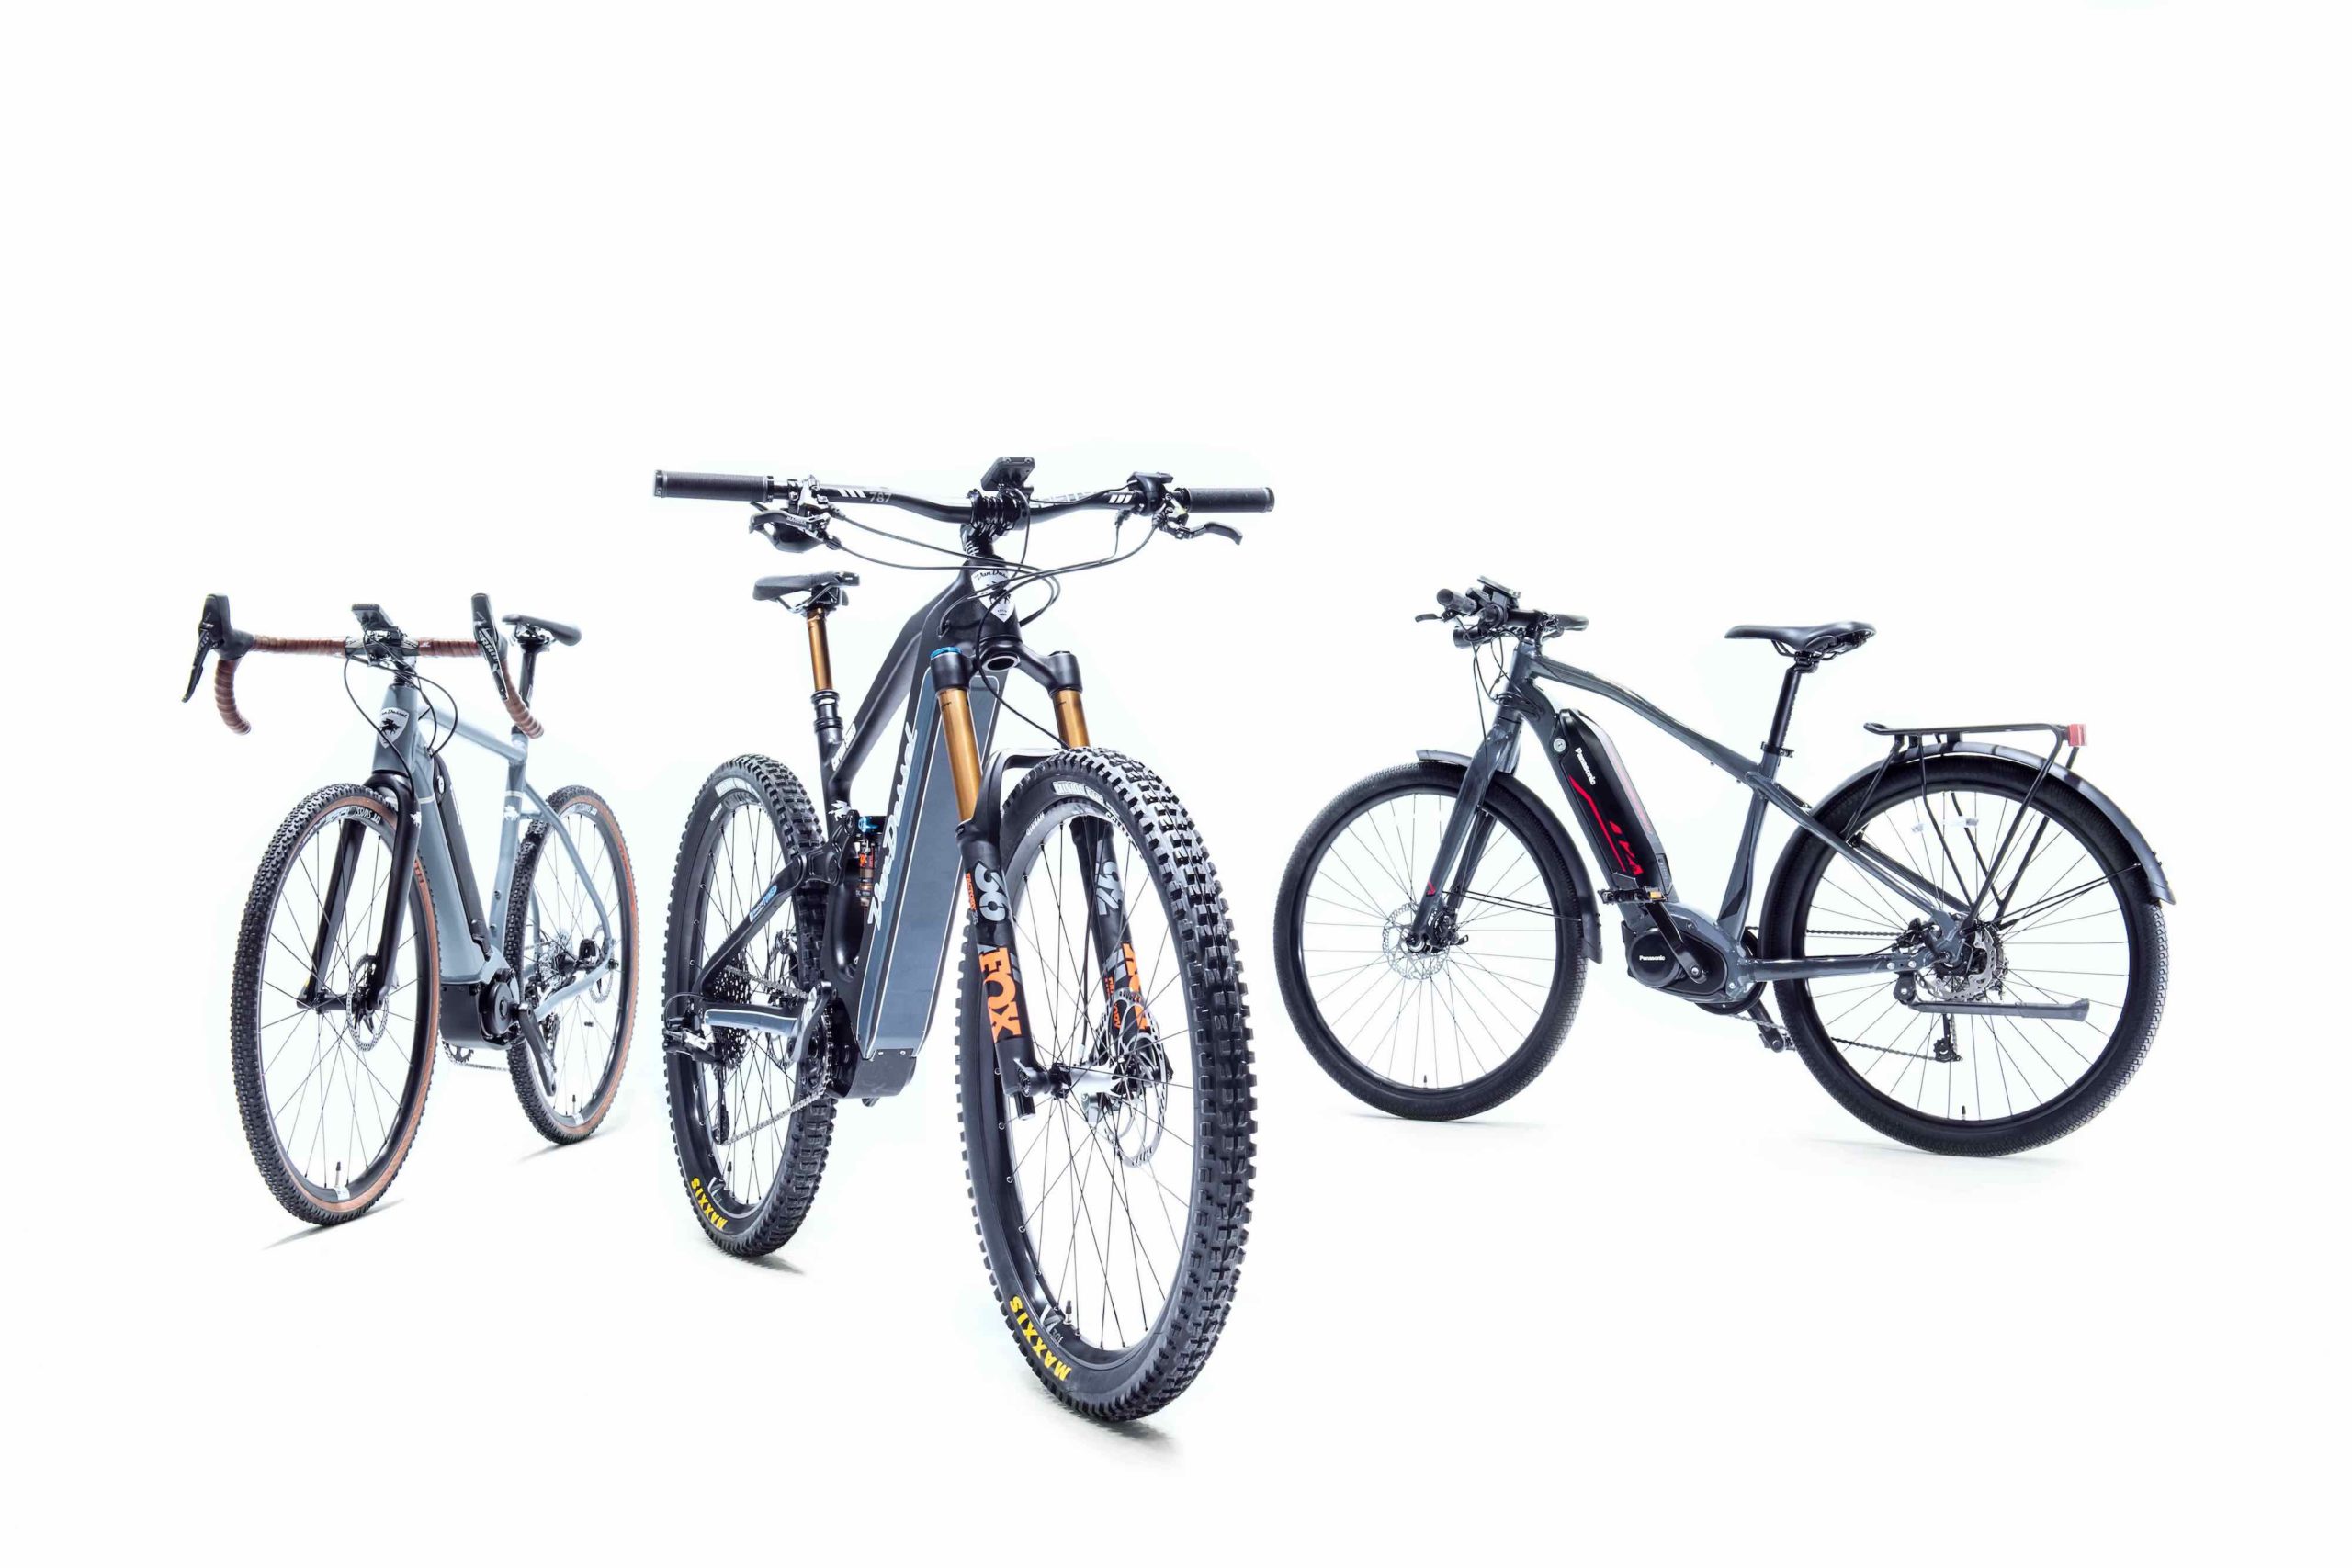 Panasonic Achieves Industry’s First eBike Safety Standard Certification from UL